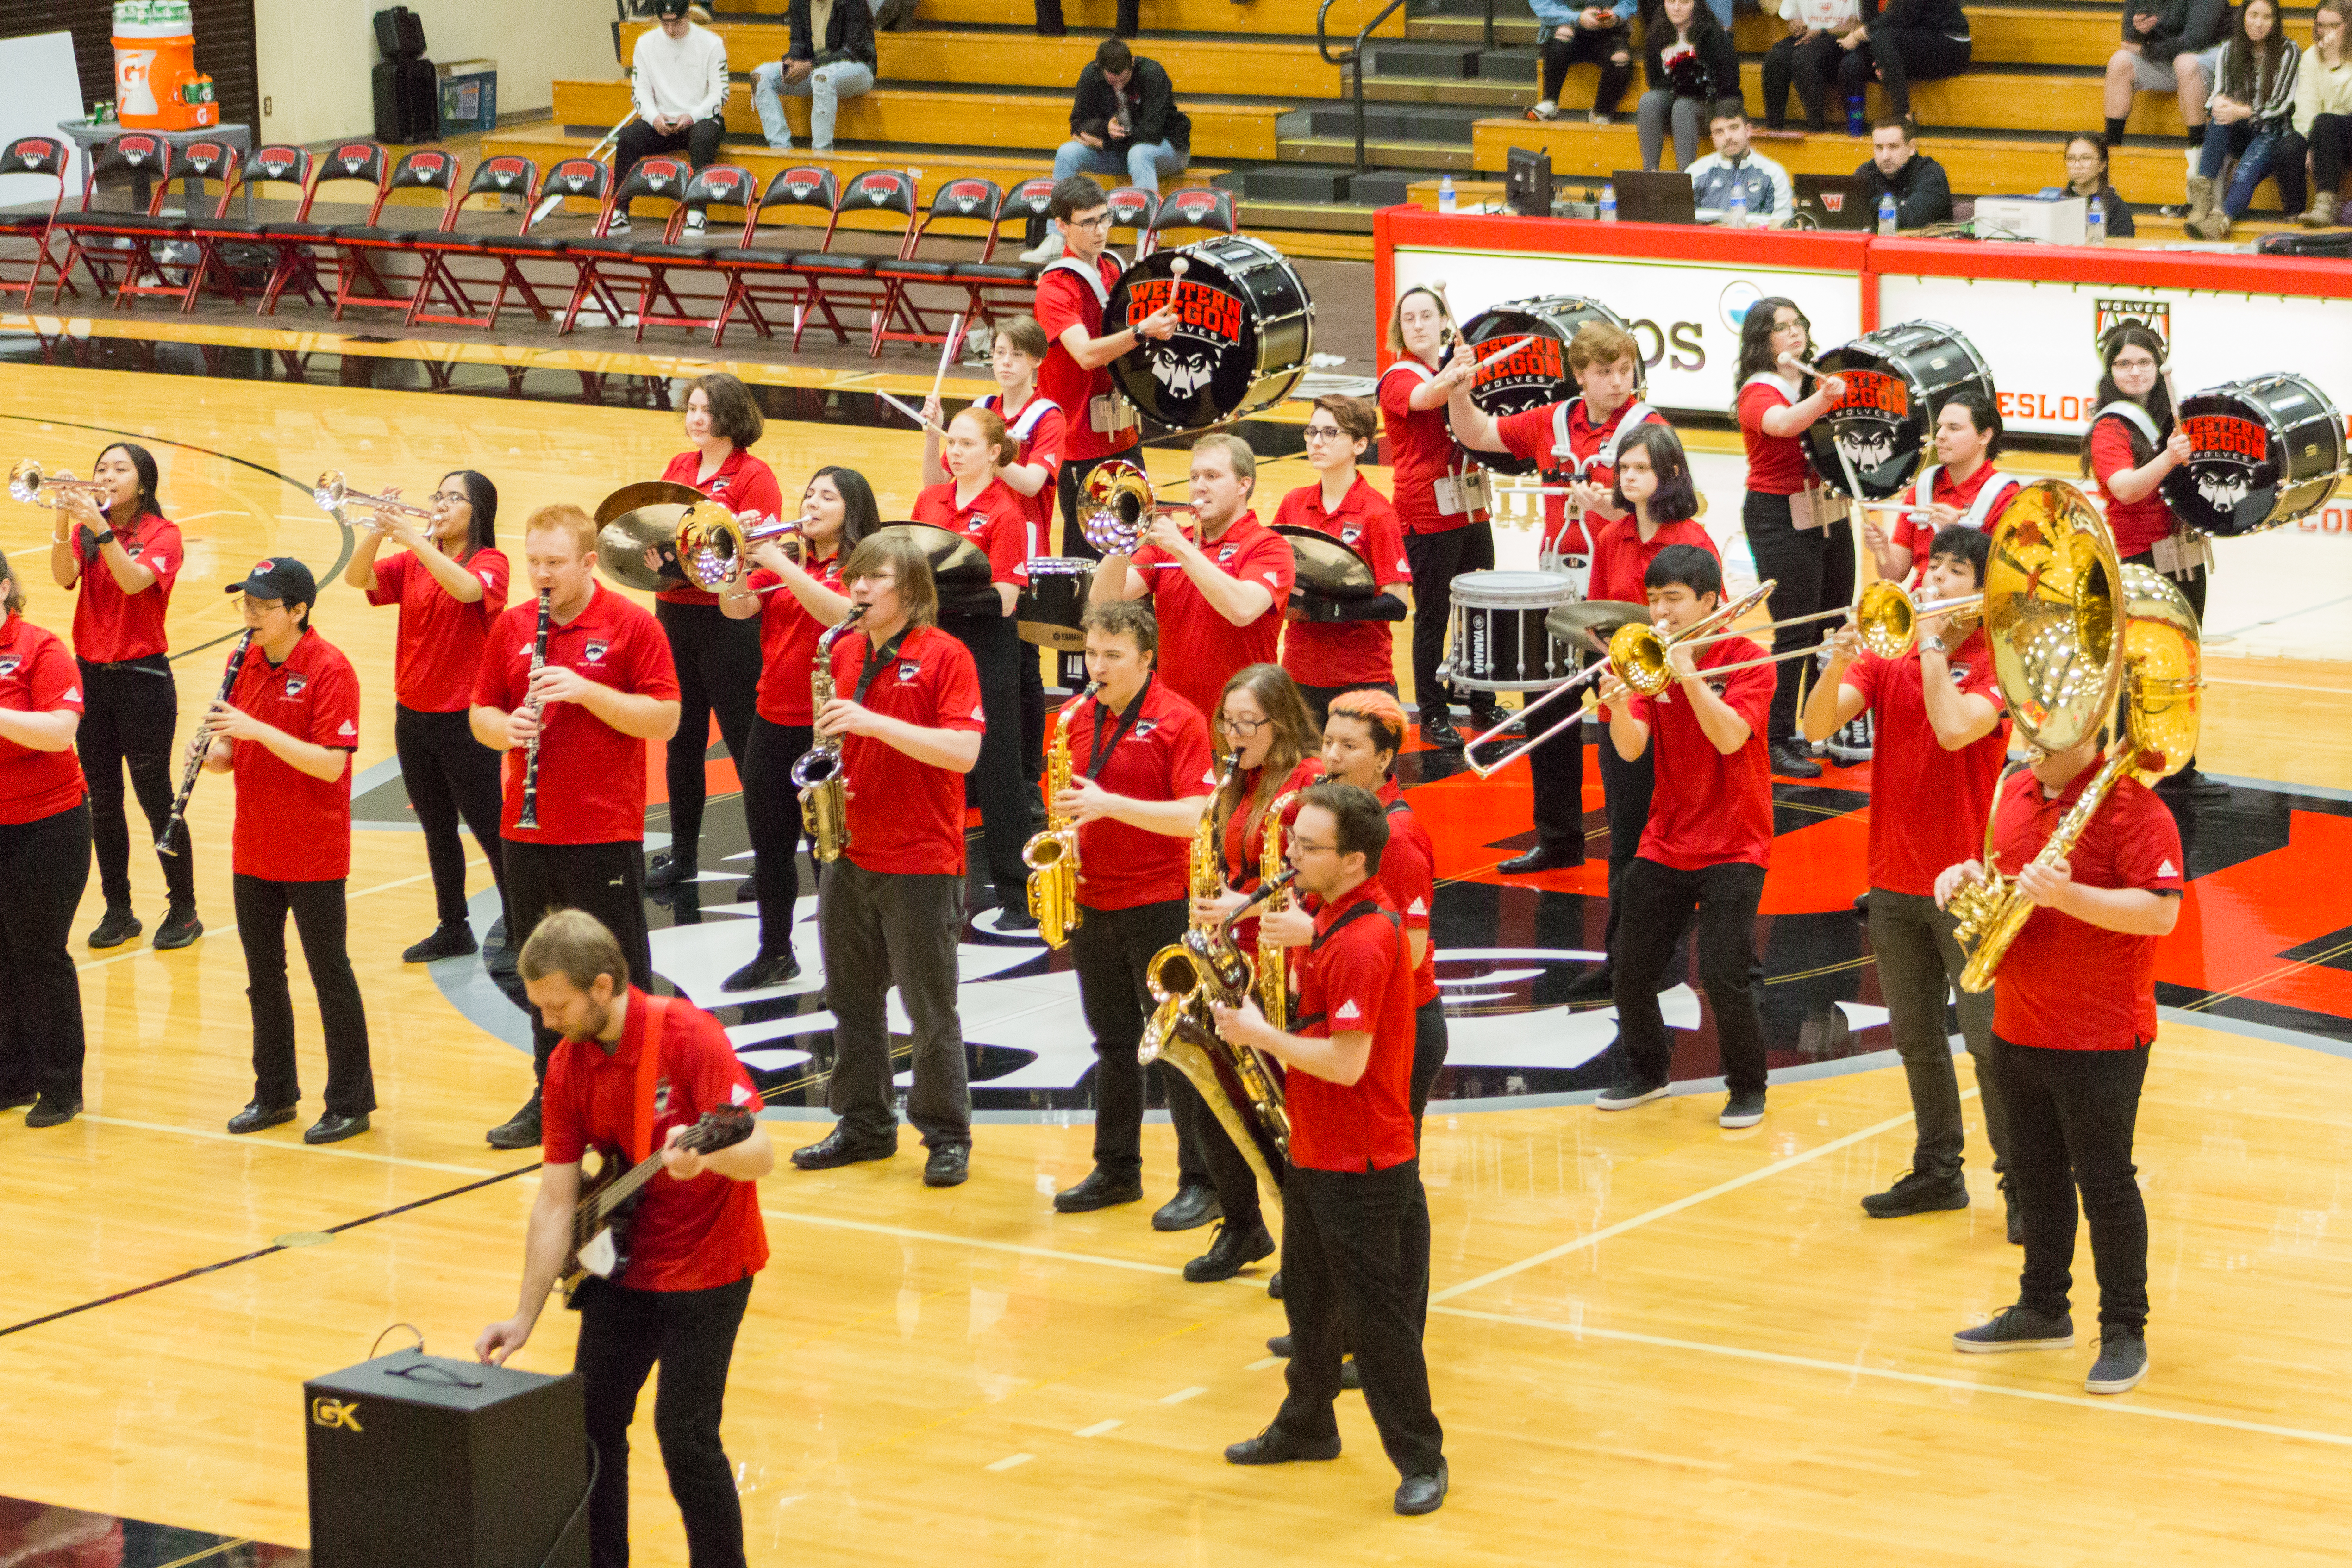 Athletic Bands Director Ben Protheroe talks about current success and future growth